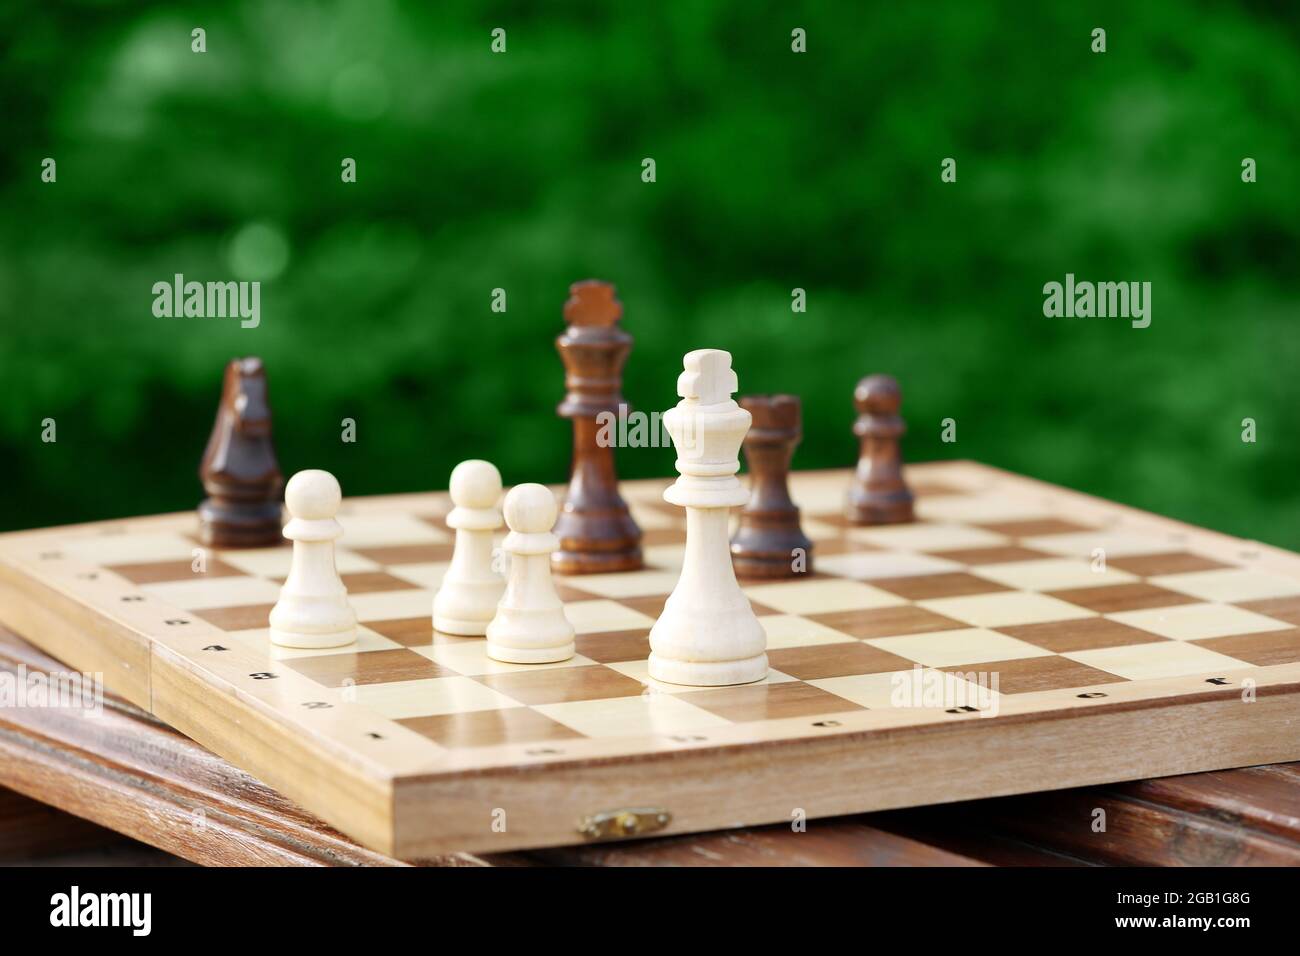 pieces and game board on nature background Stock